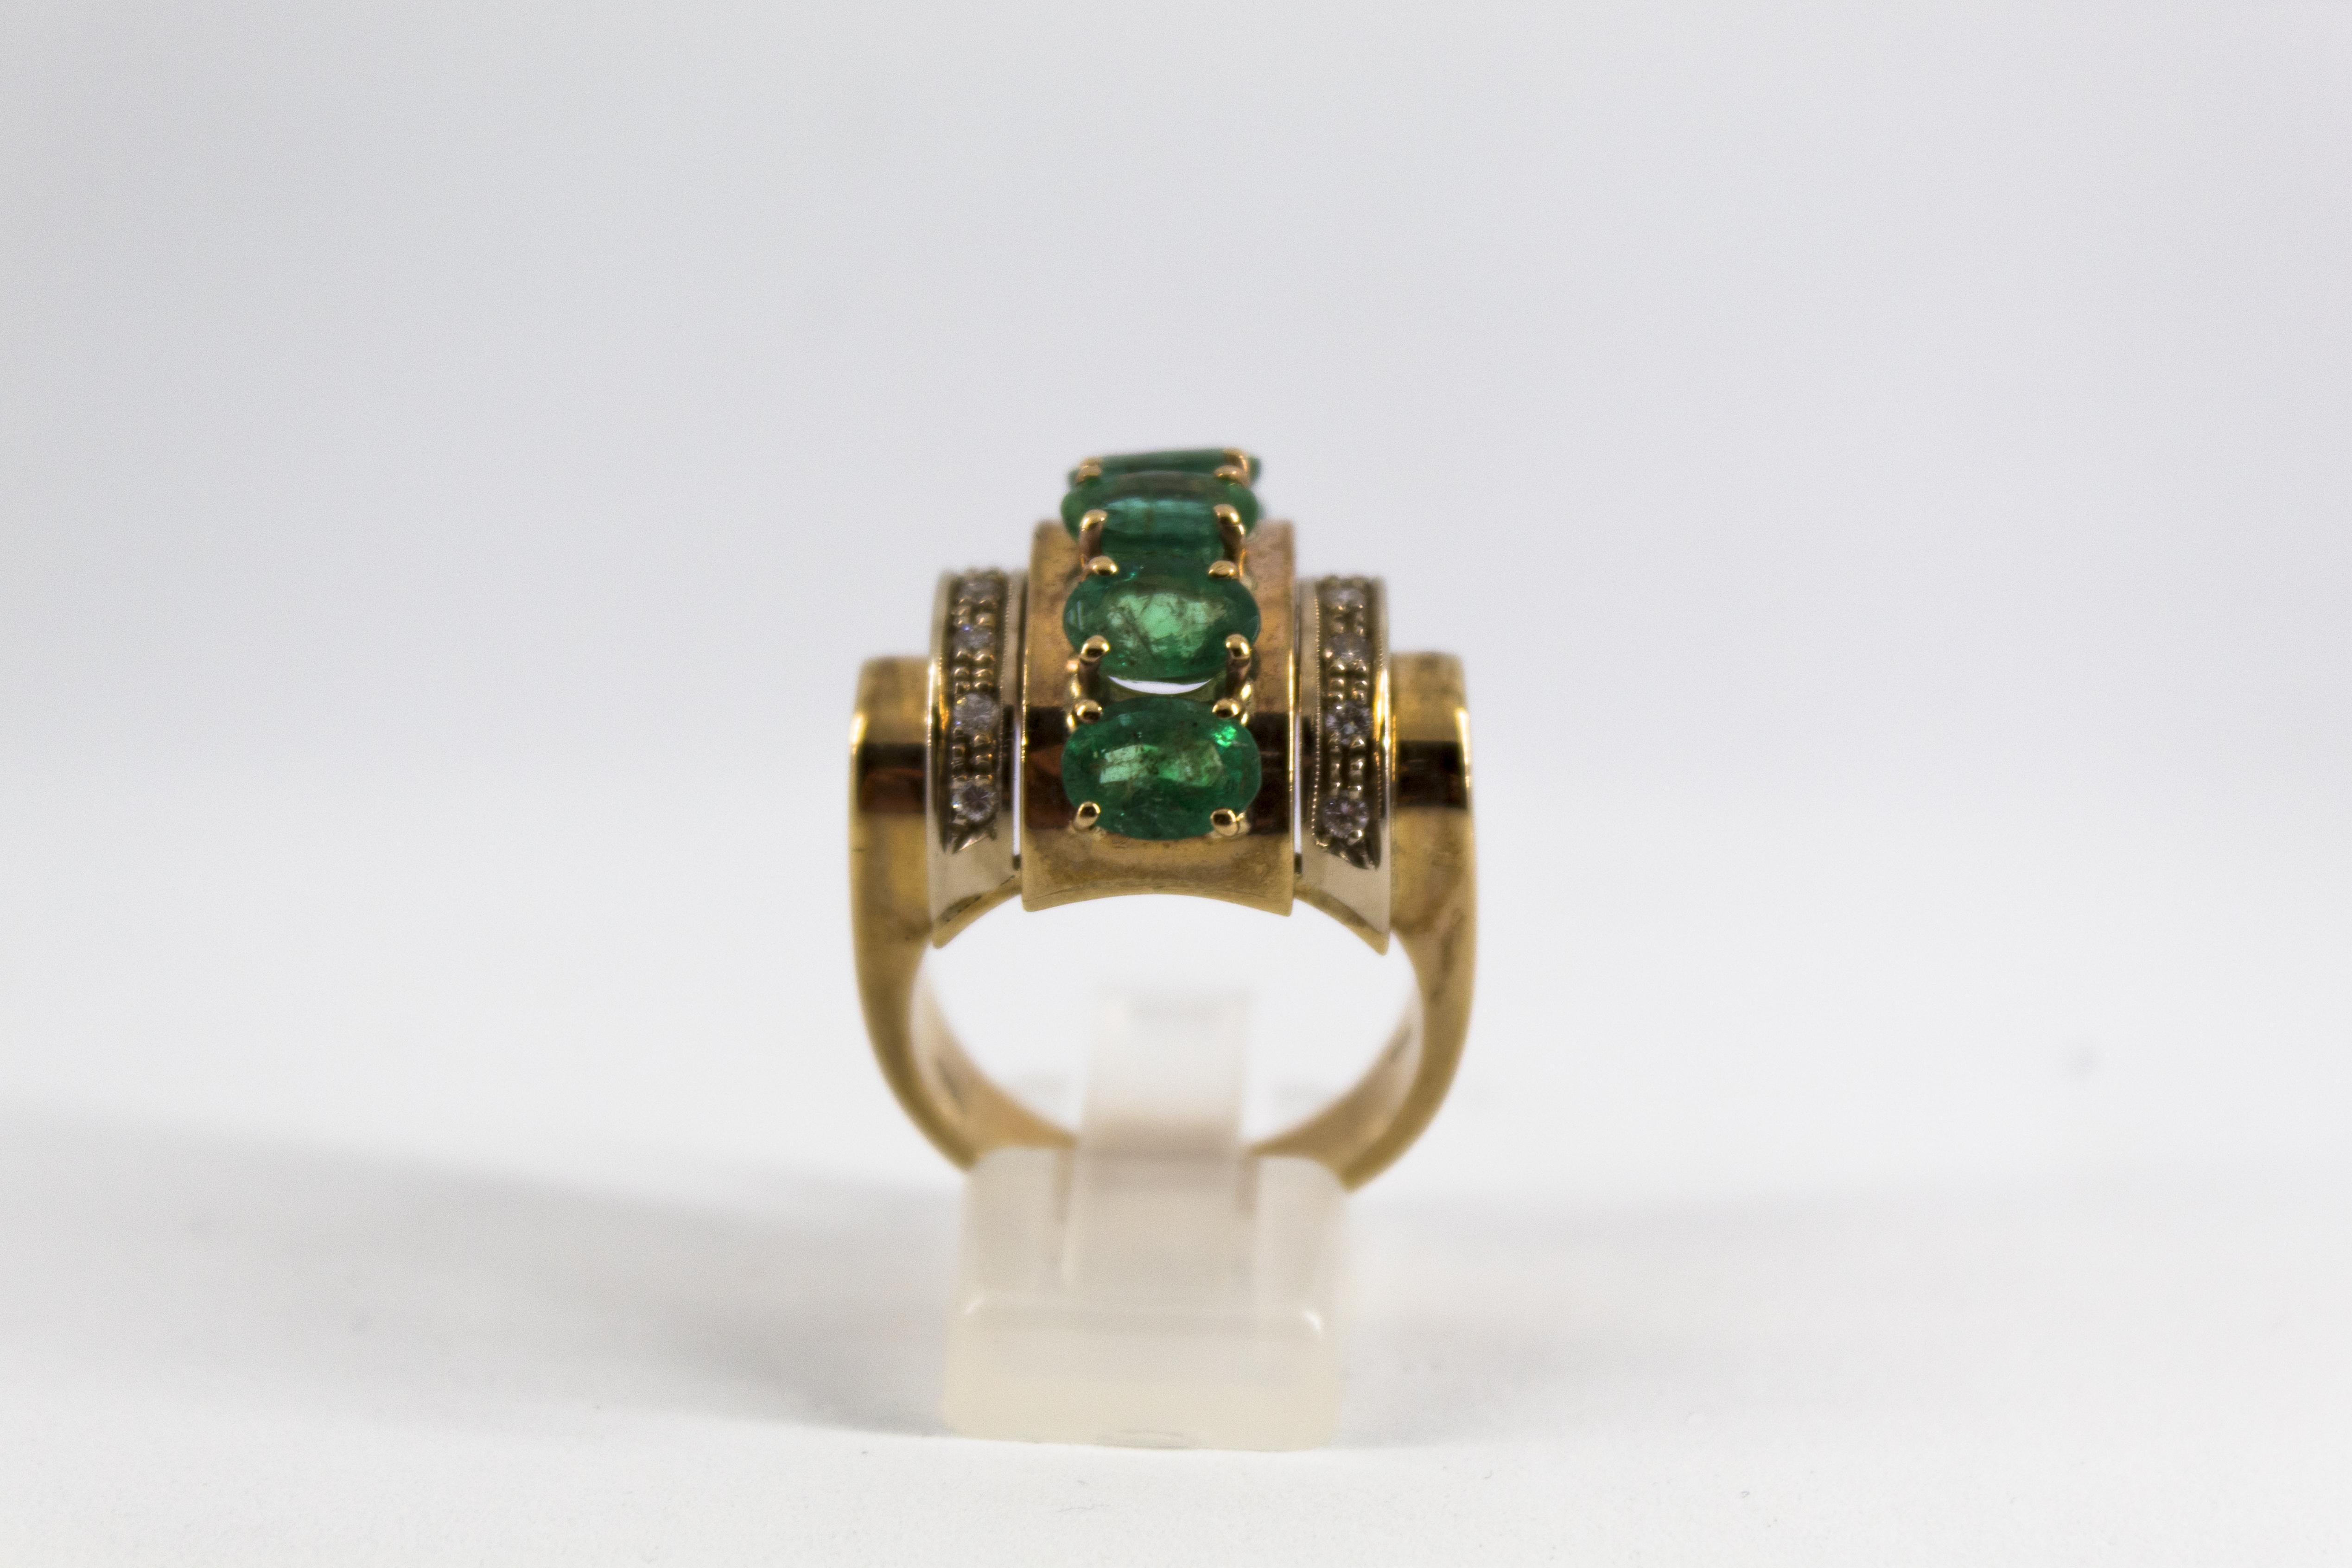 This Ring is made of 14K Yellow Gold.
This Ring has 0.30 Carats of White Diamonds.
This Ring has 5.00 Carats of Emeralds.
This Ring is available also with Rubies.
Size ITA: 19 USA: 8 3/4
We're a workshop so every piece is handmade, customizable and